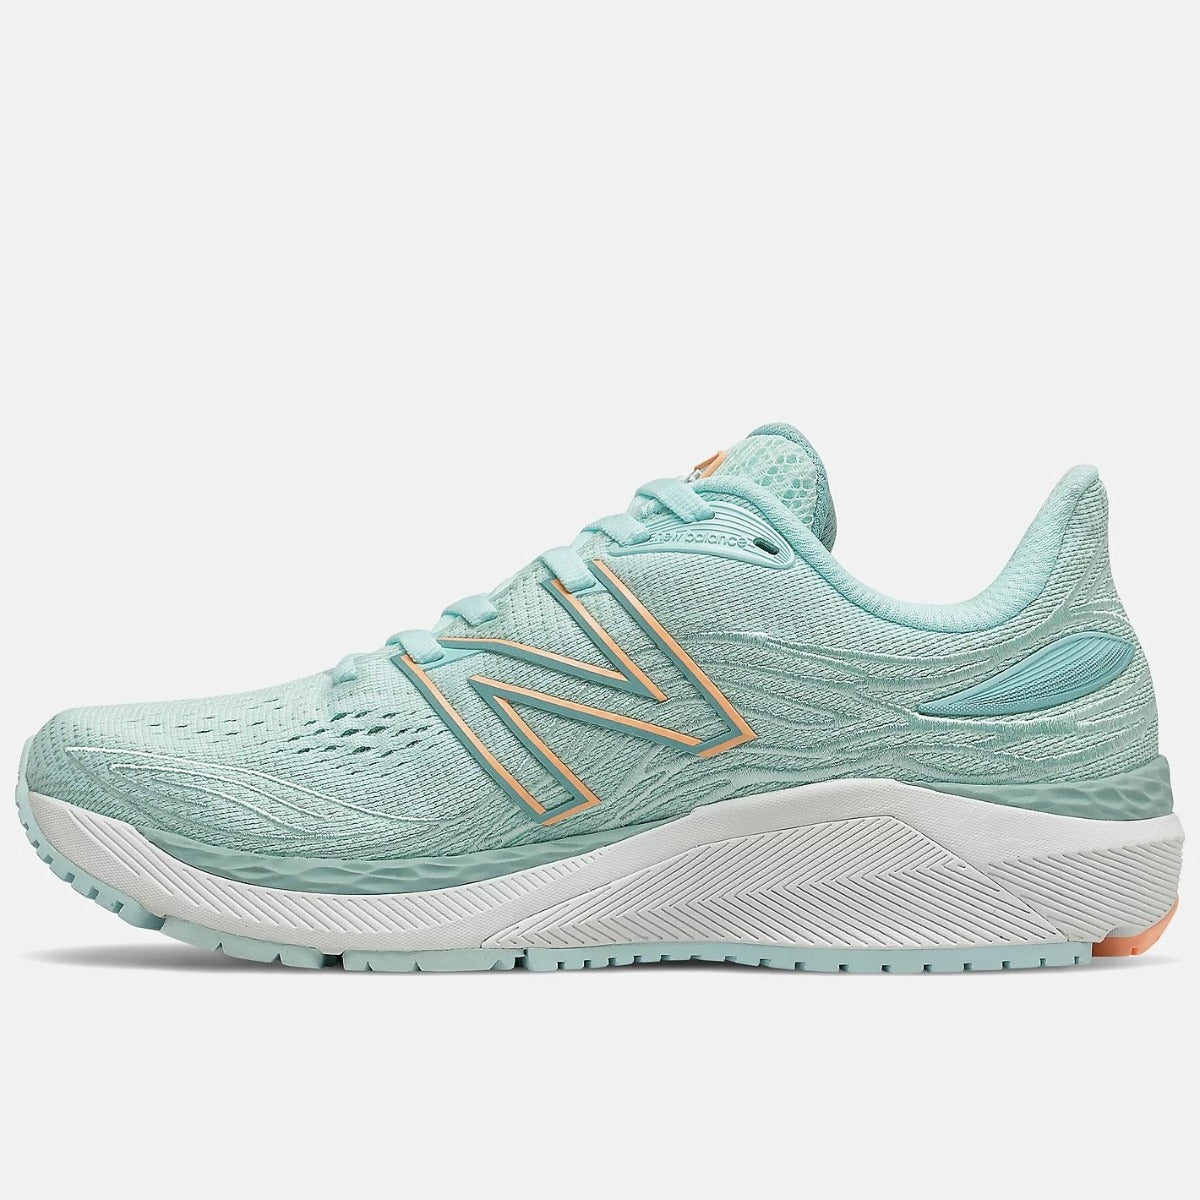 New Balance 860v12 Ladies Running Shoes (Wide Fit)